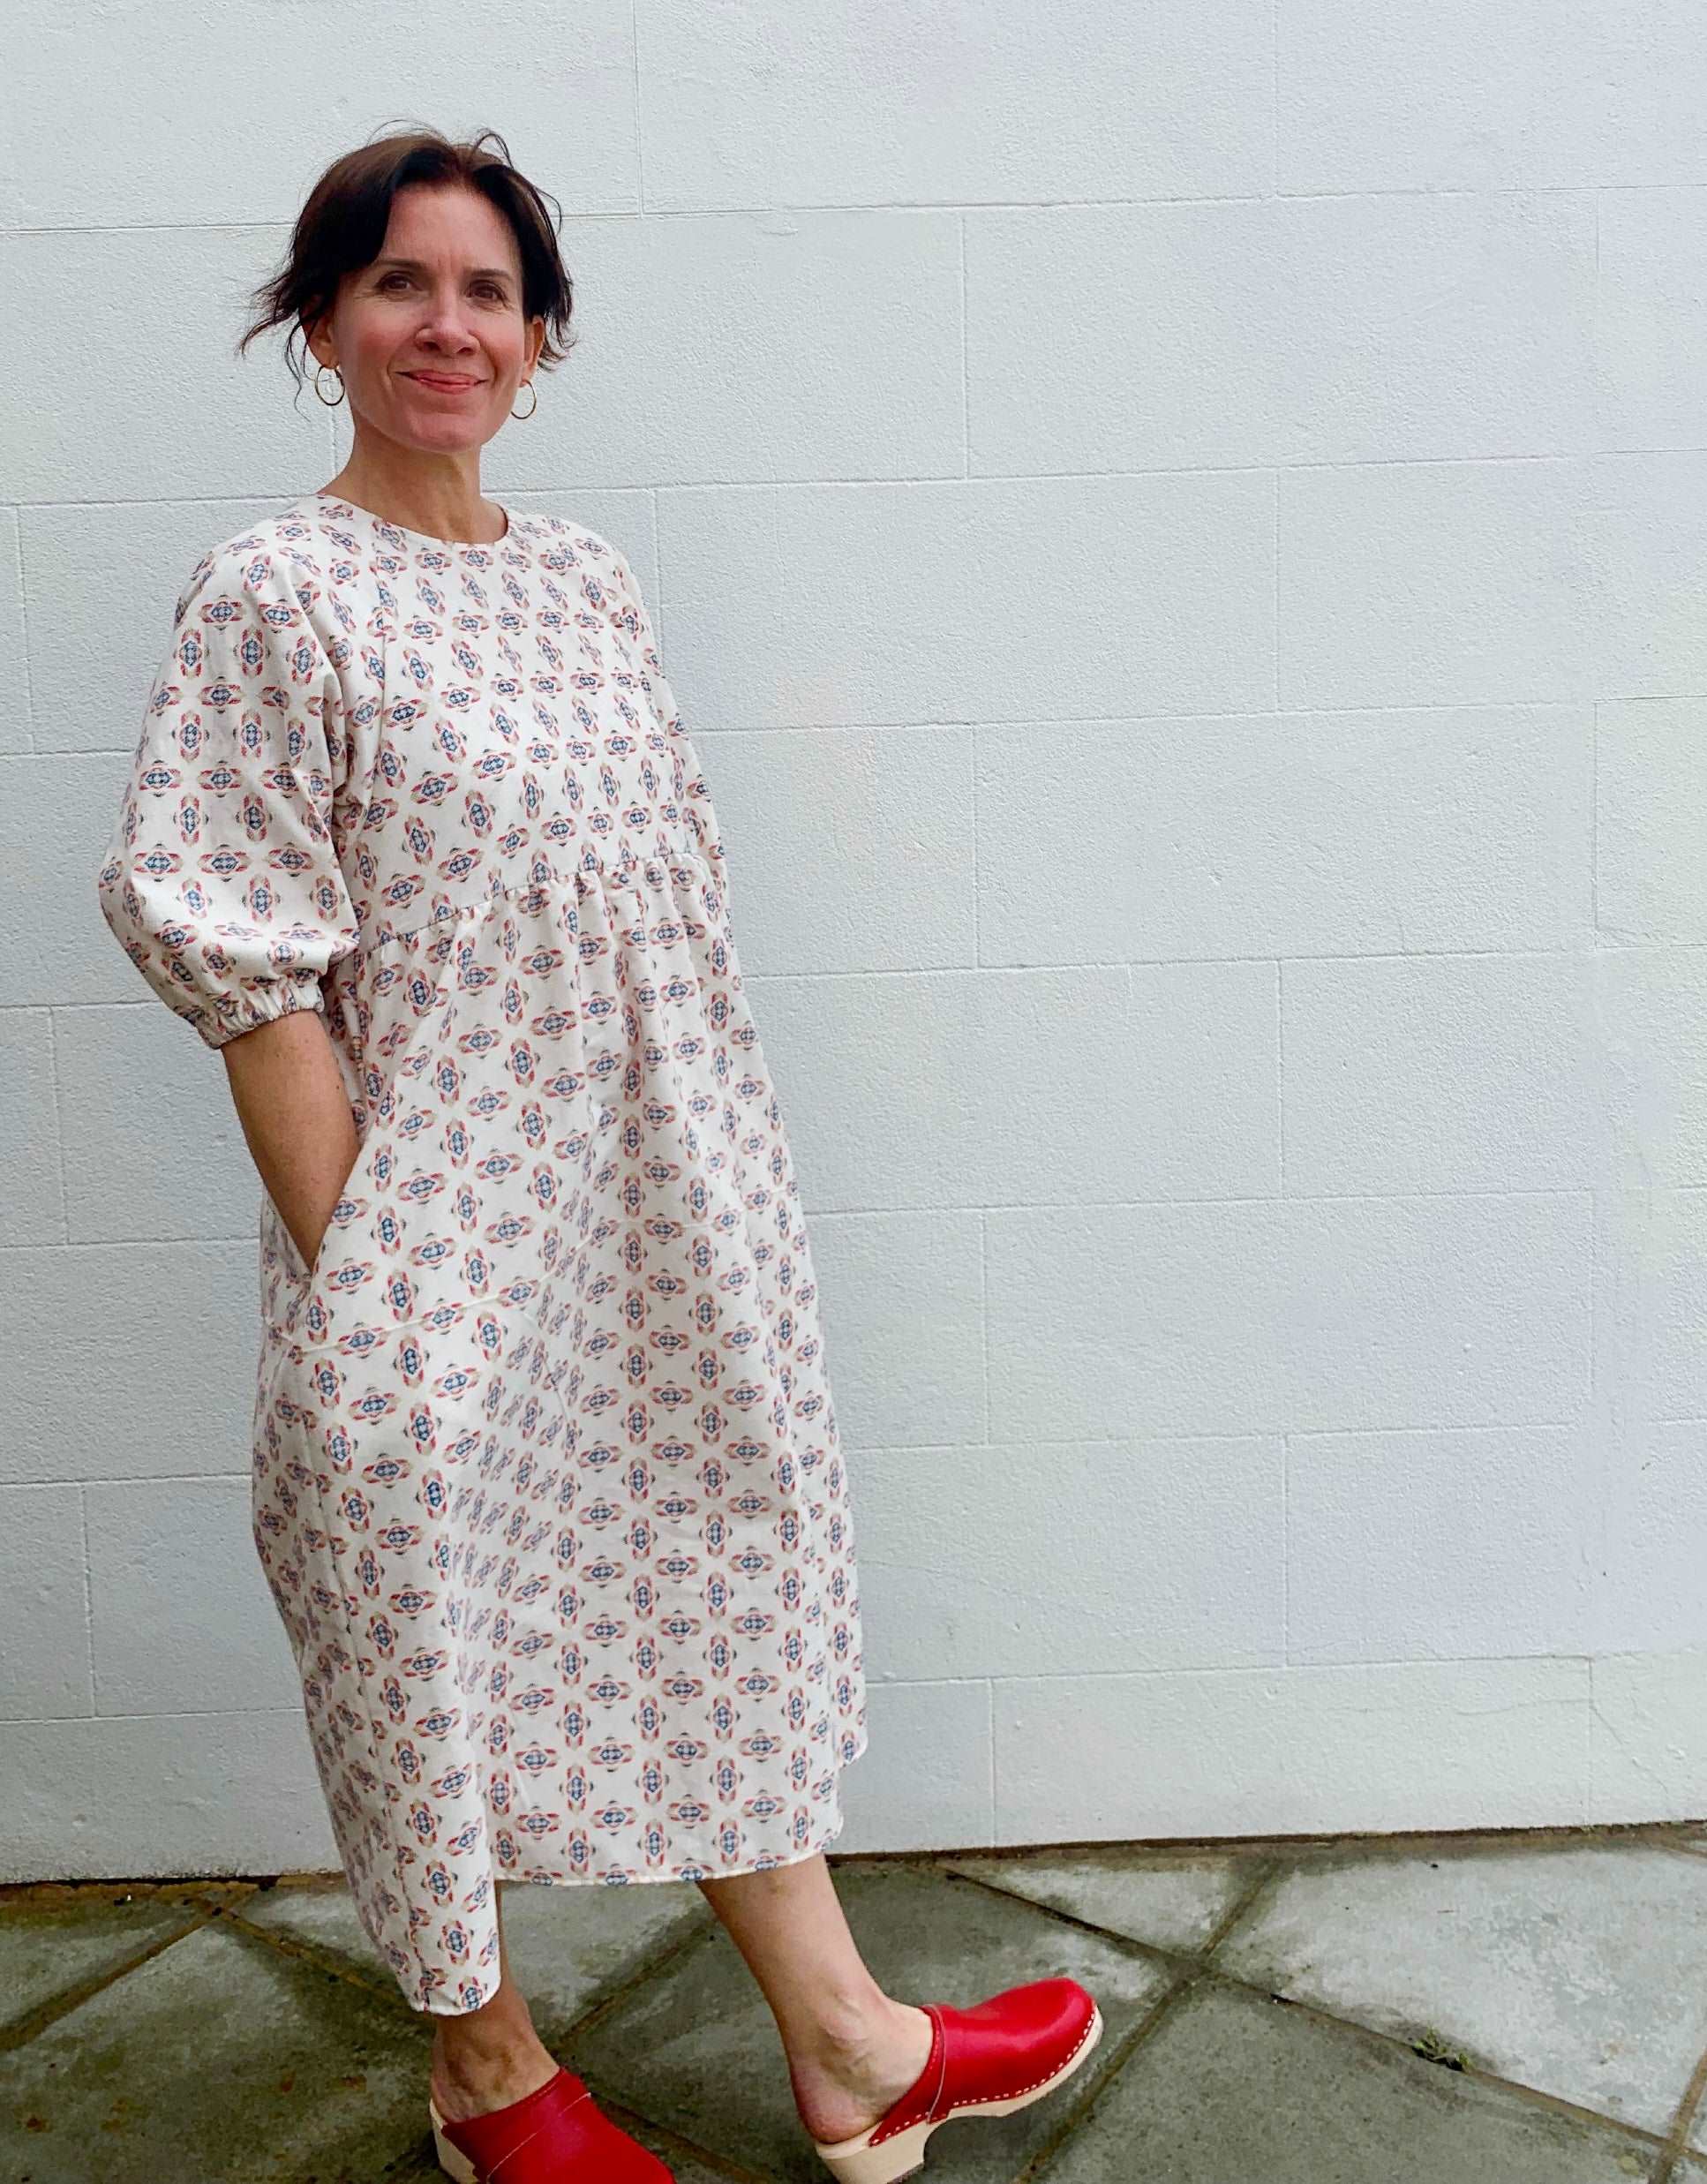 Cream brushed cotton dress with pockets wearing red clogs